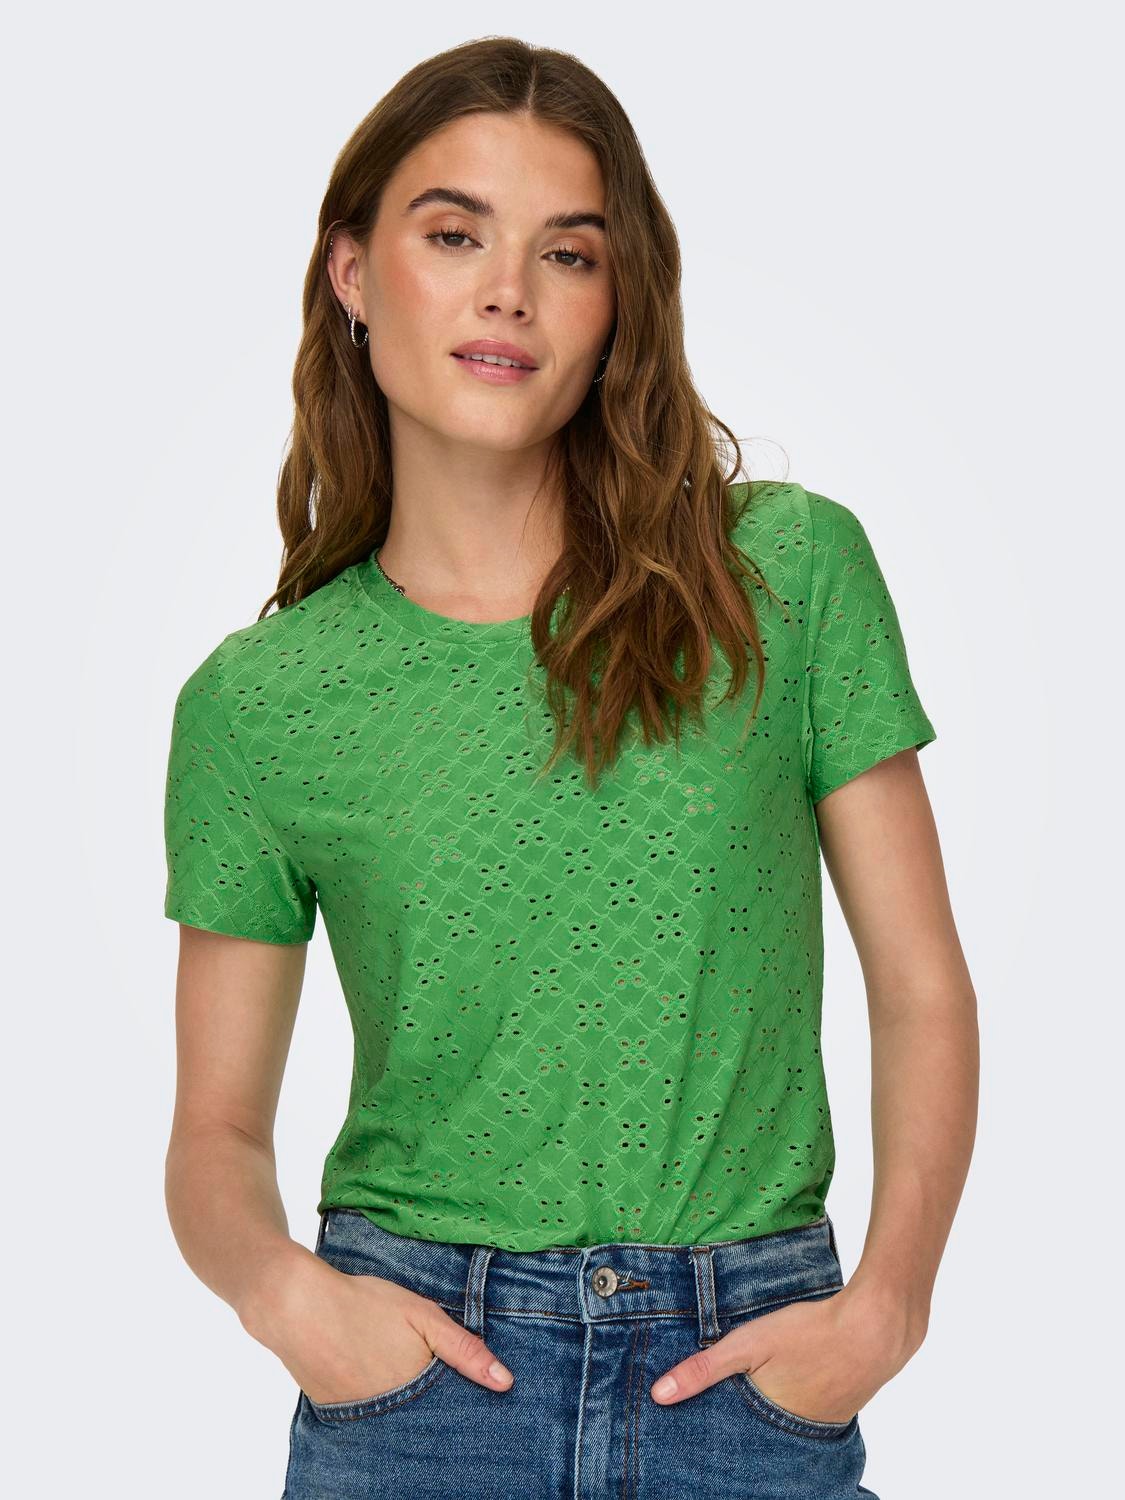 ONLY O-hals t-shirt -Green Bee - 15158450